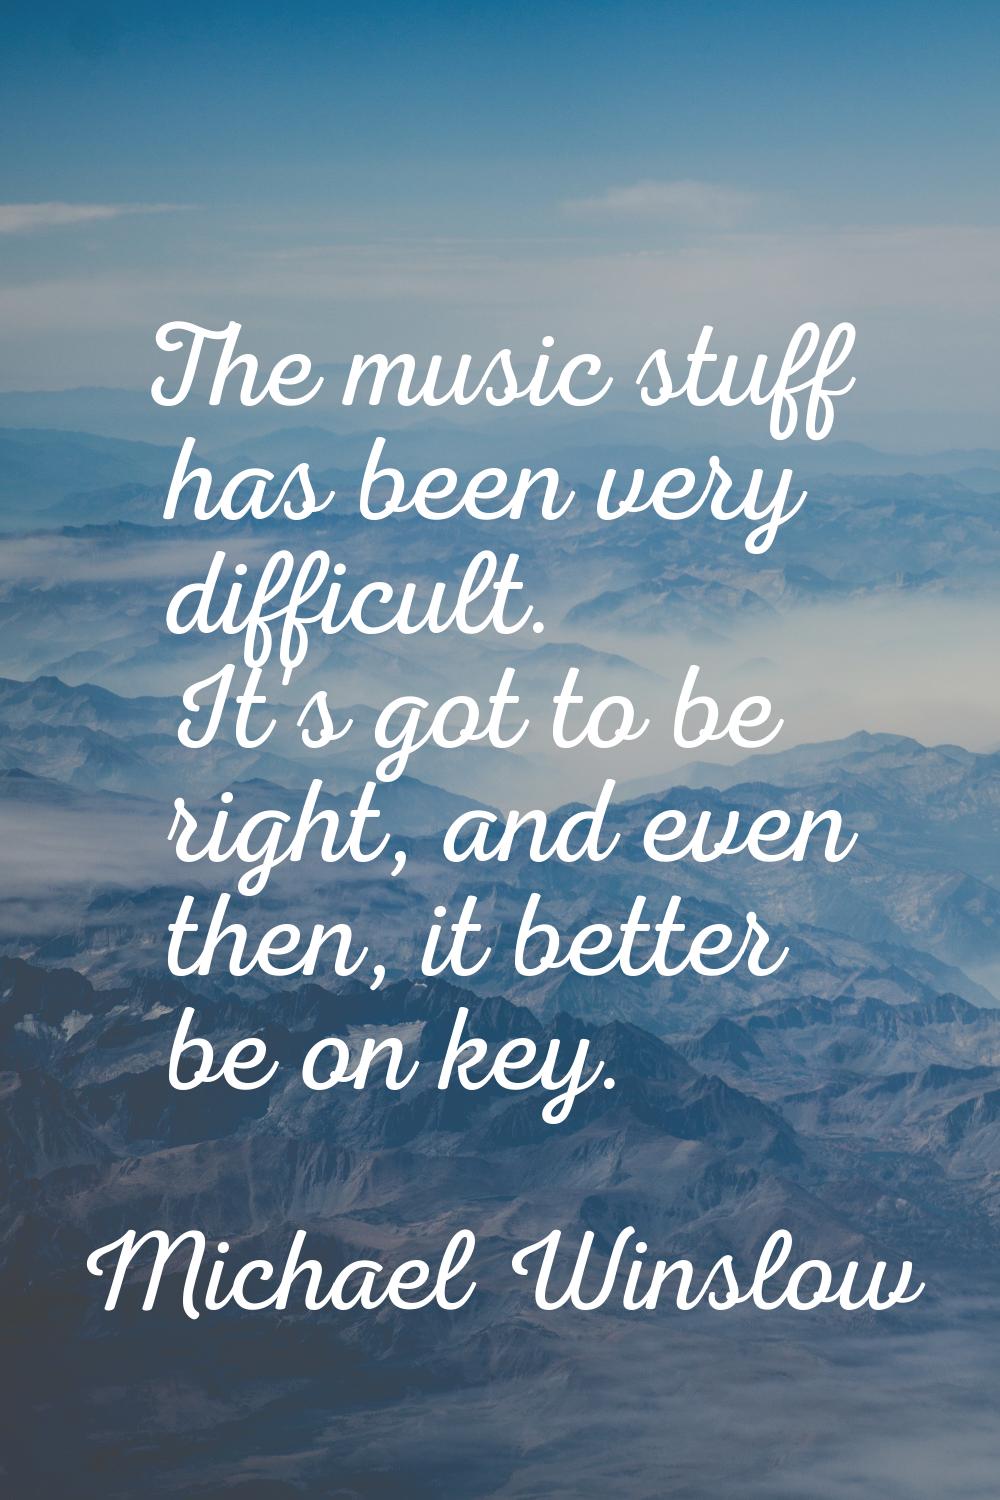 The music stuff has been very difficult. It's got to be right, and even then, it better be on key.